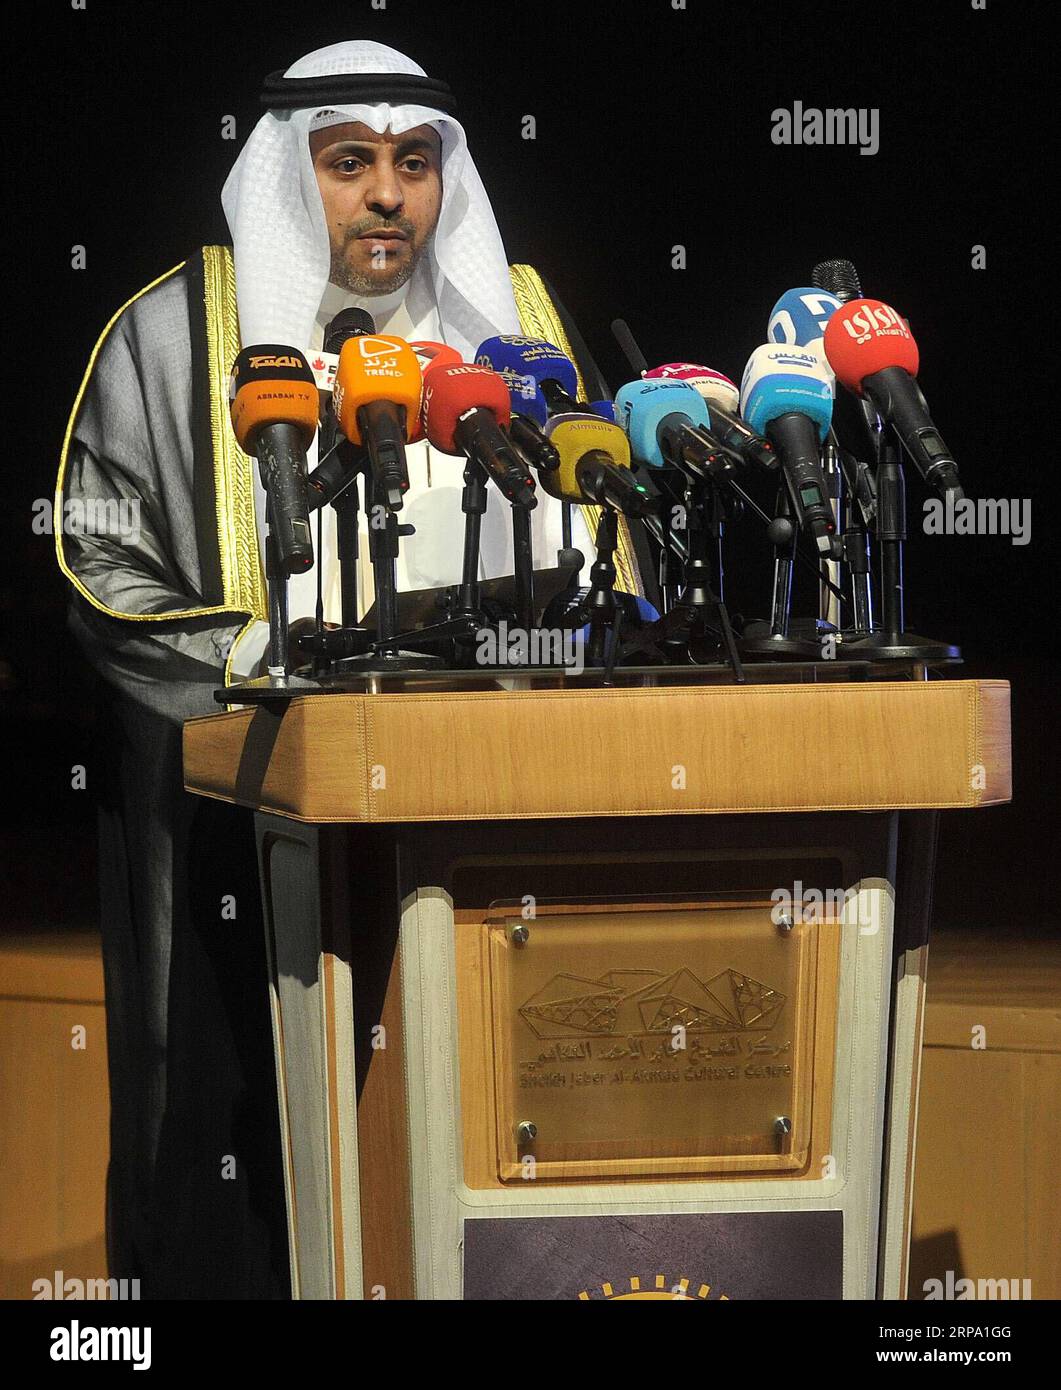 (190422) -- KUWAIT CITY, April 22, 2019 -- Mohammad Al-Jabri, Kuwait s minister of information and minister of state for youth affairs, speaks at the opening ceremony of the 16th Arab Media Forum in Kuwait City, Kuwait, on April 21, 2019. The two-day forum will discuss several topics including humanization of media, the reality and future of the Arab s media, the skill of dealing with social media and the language of dialogue. ) KUWAIT-KUWAIT CITY-ARAB MEDIA FORUM-OPENING CEREMONY Asad PUBLICATIONxNOTxINxCHN Stock Photo